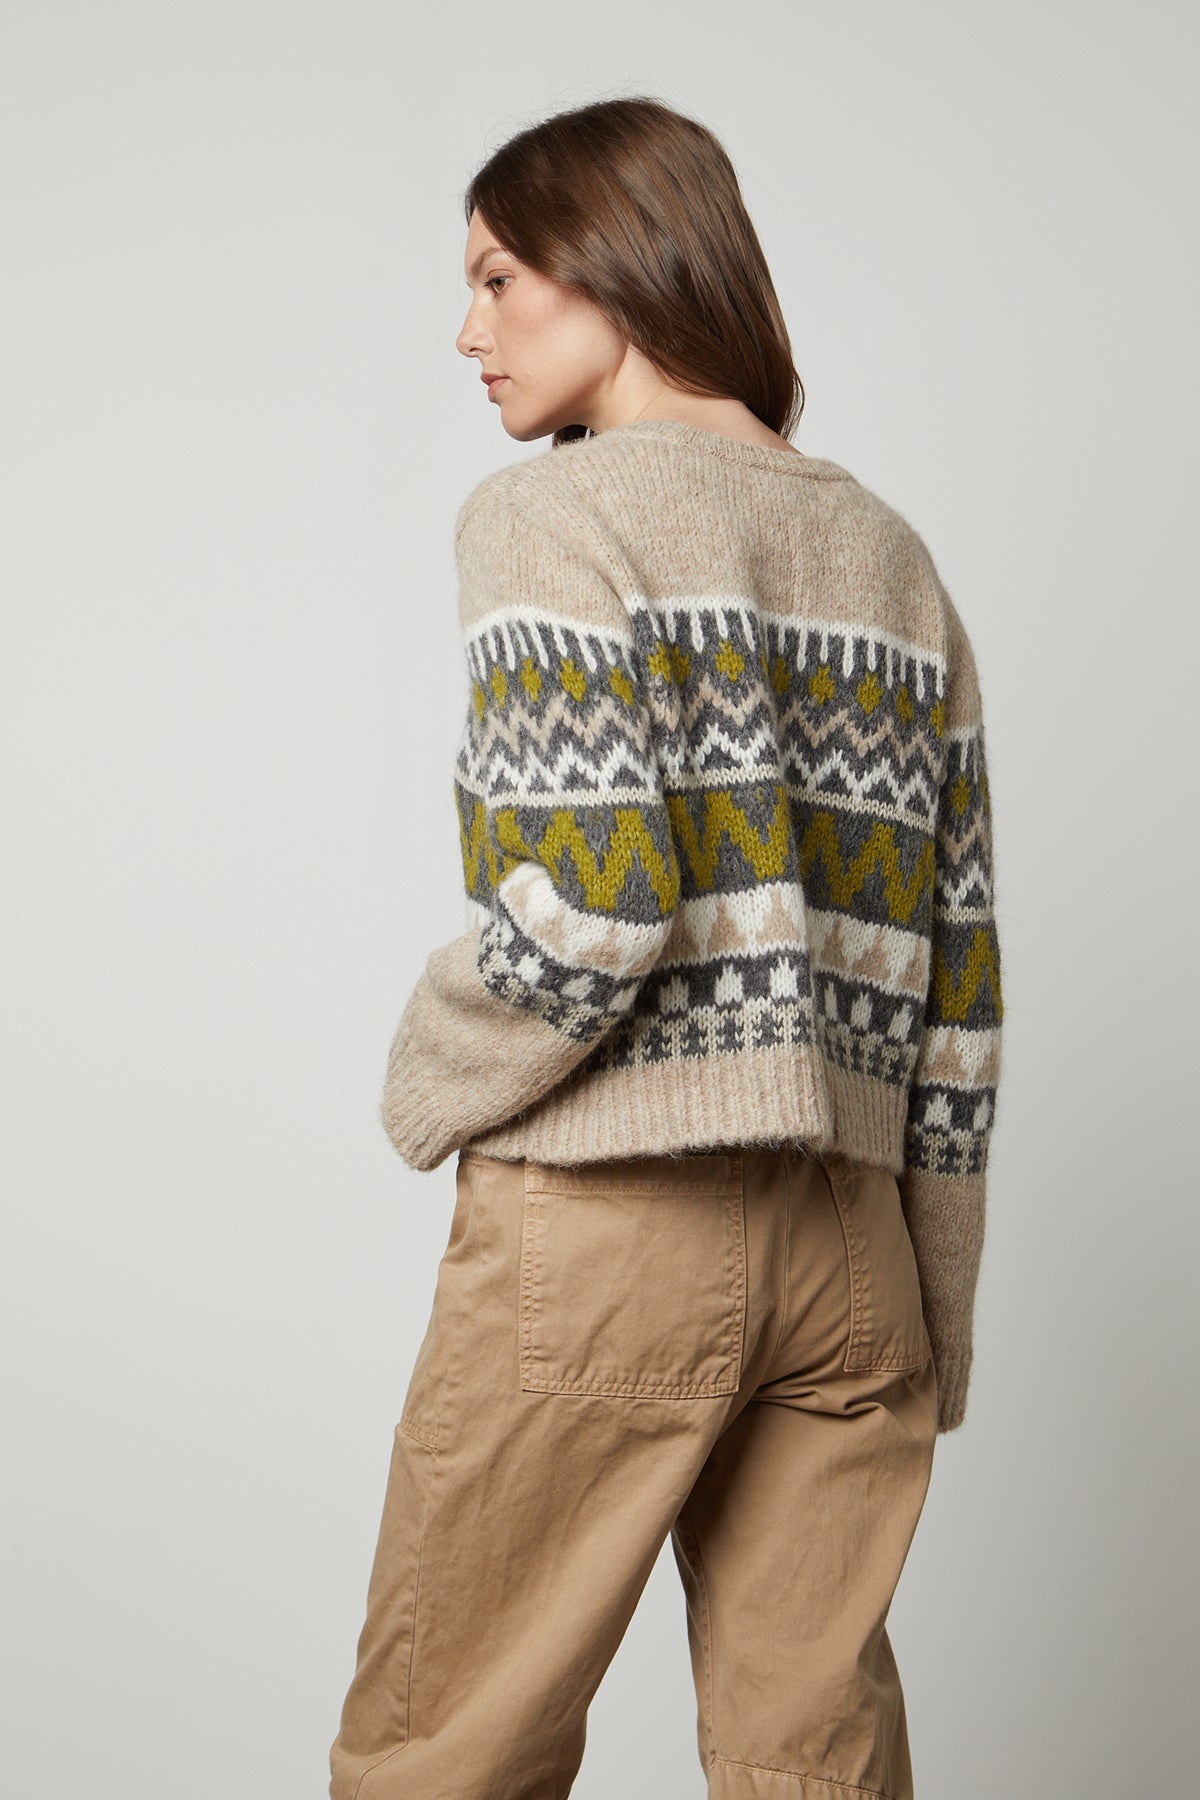 The back view of a woman wearing a cozy Velvet by Graham & Spencer MAKENZIE ALPACA CABLE KNIT CREW NECK SWEATER and khaki pants.-35626092986561